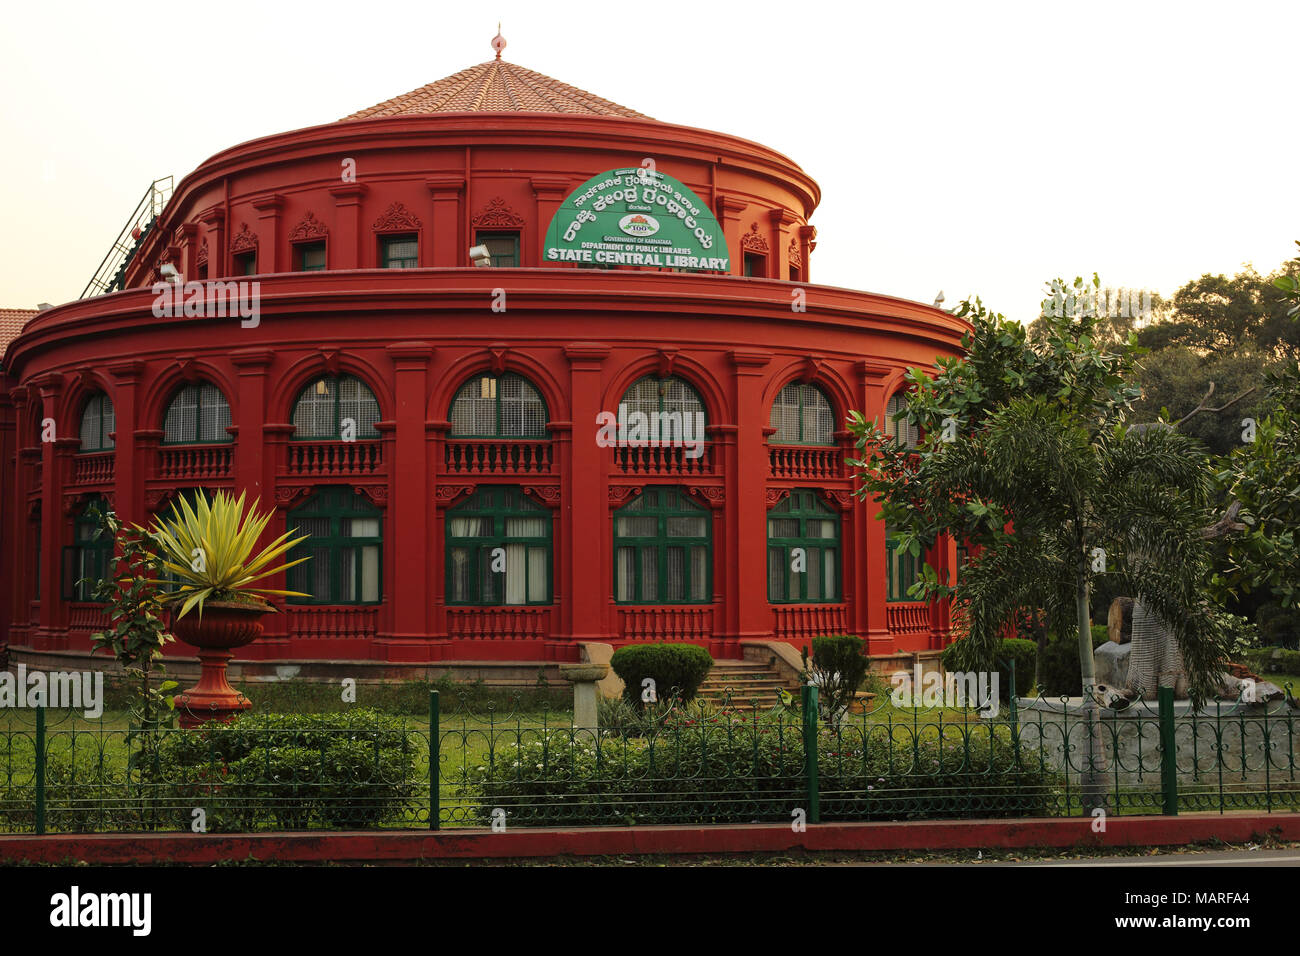 Bangalore, India - October 19, 2016: A back side view of State Central Library, a red building in neoclassical style, stands as an iconic landmark. Stock Photo